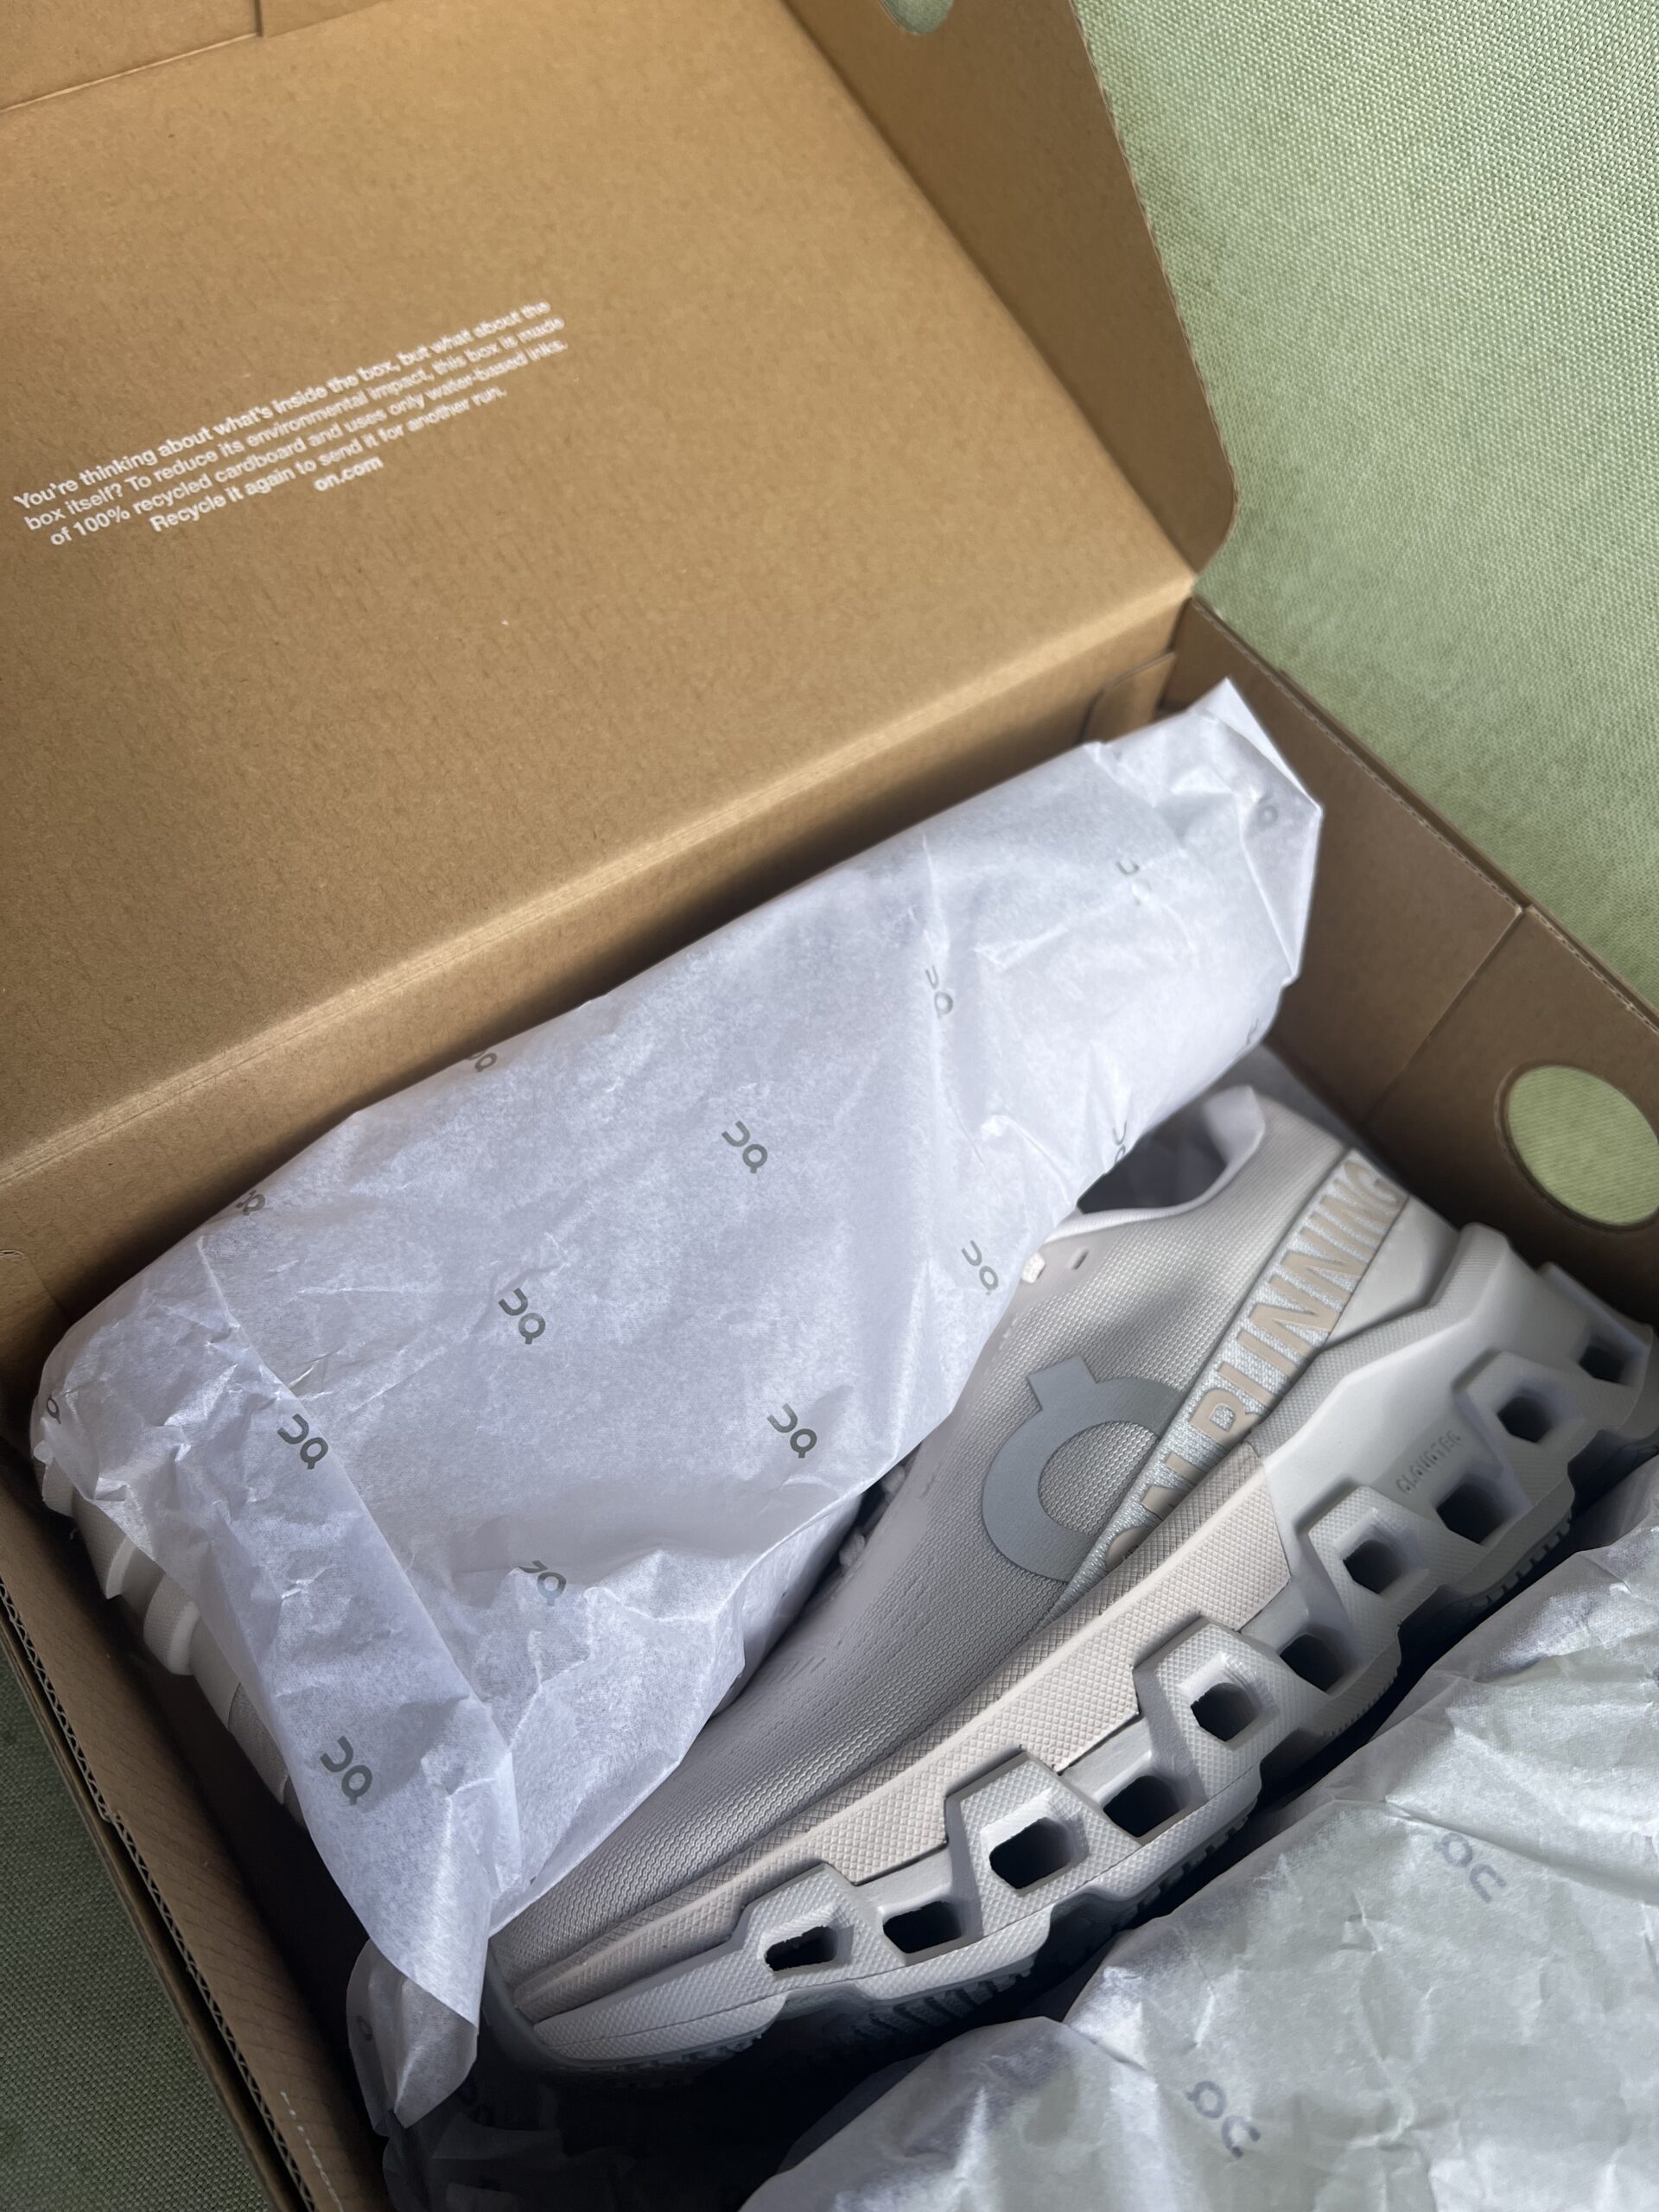 A new pair of shoes in a cardboard box, partially covered with on-branded tissue paper.